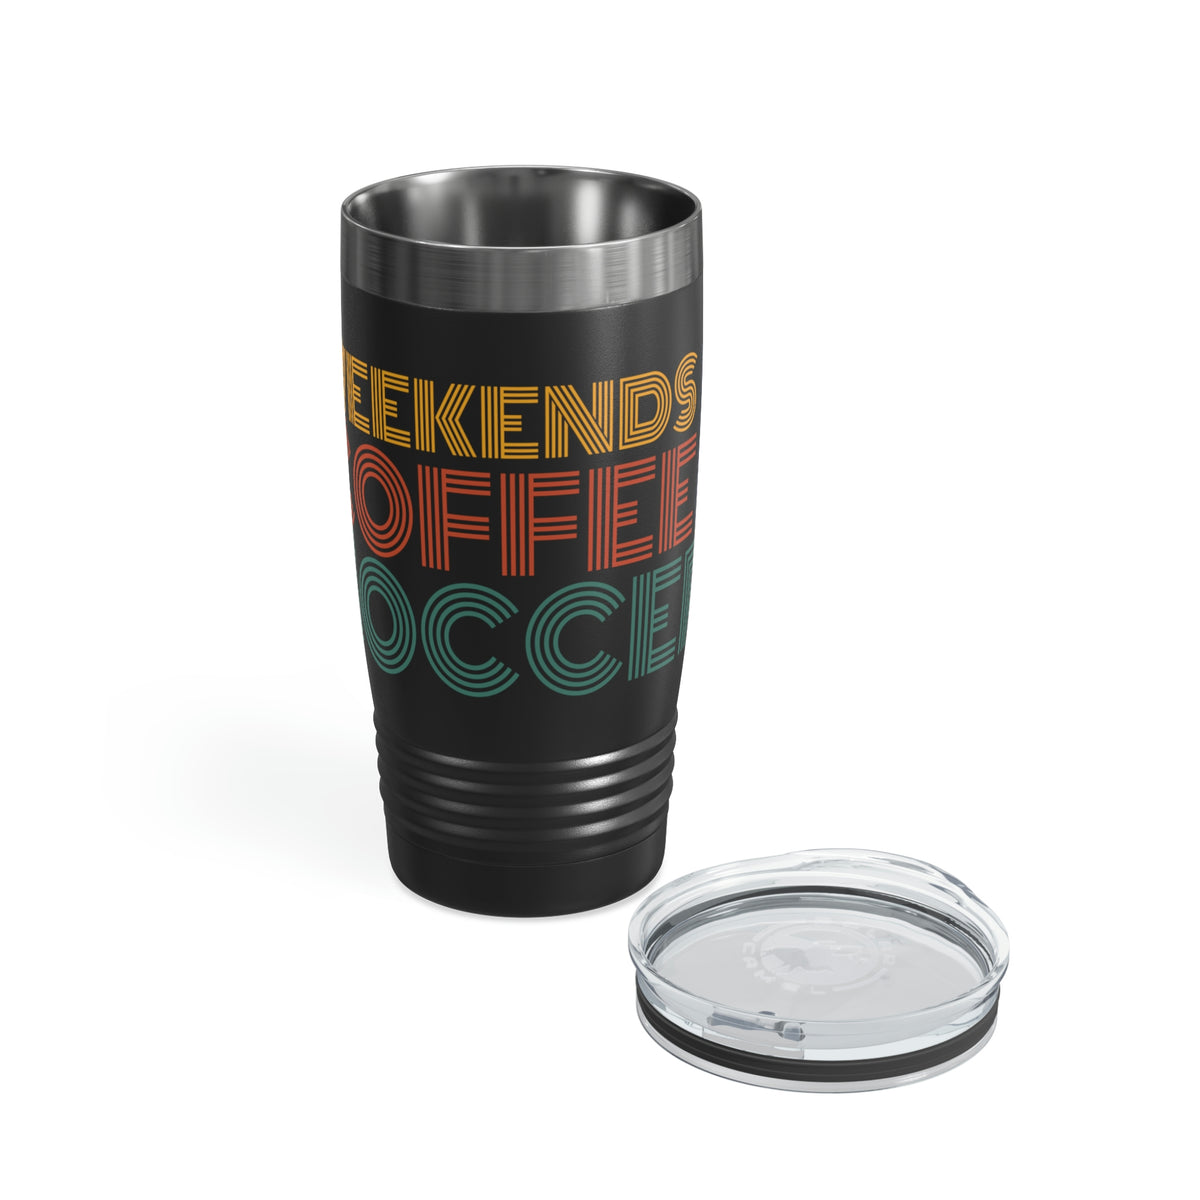 Weekends Coffee and Soccer 20 oz Tumbler